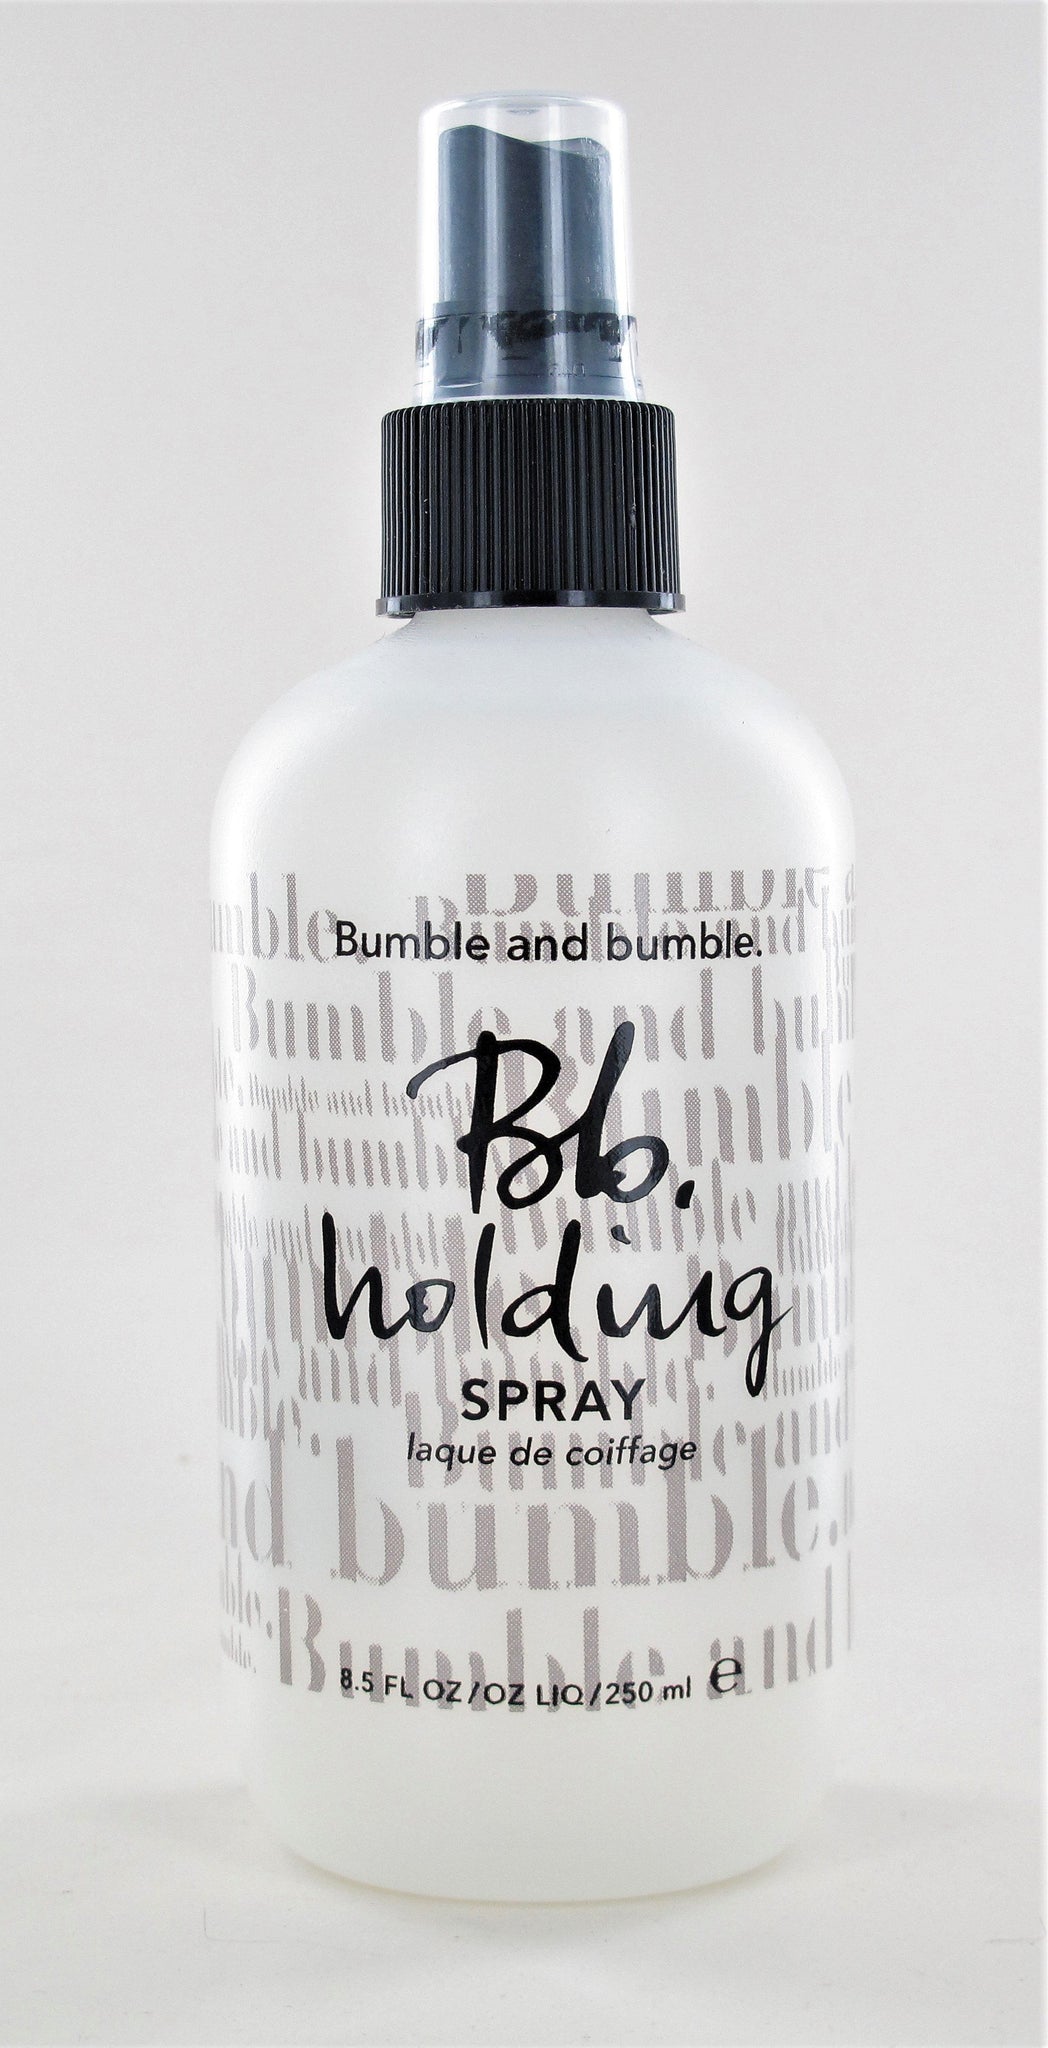 Bumble and Bumble Holding Styling Spray 8.5 oz